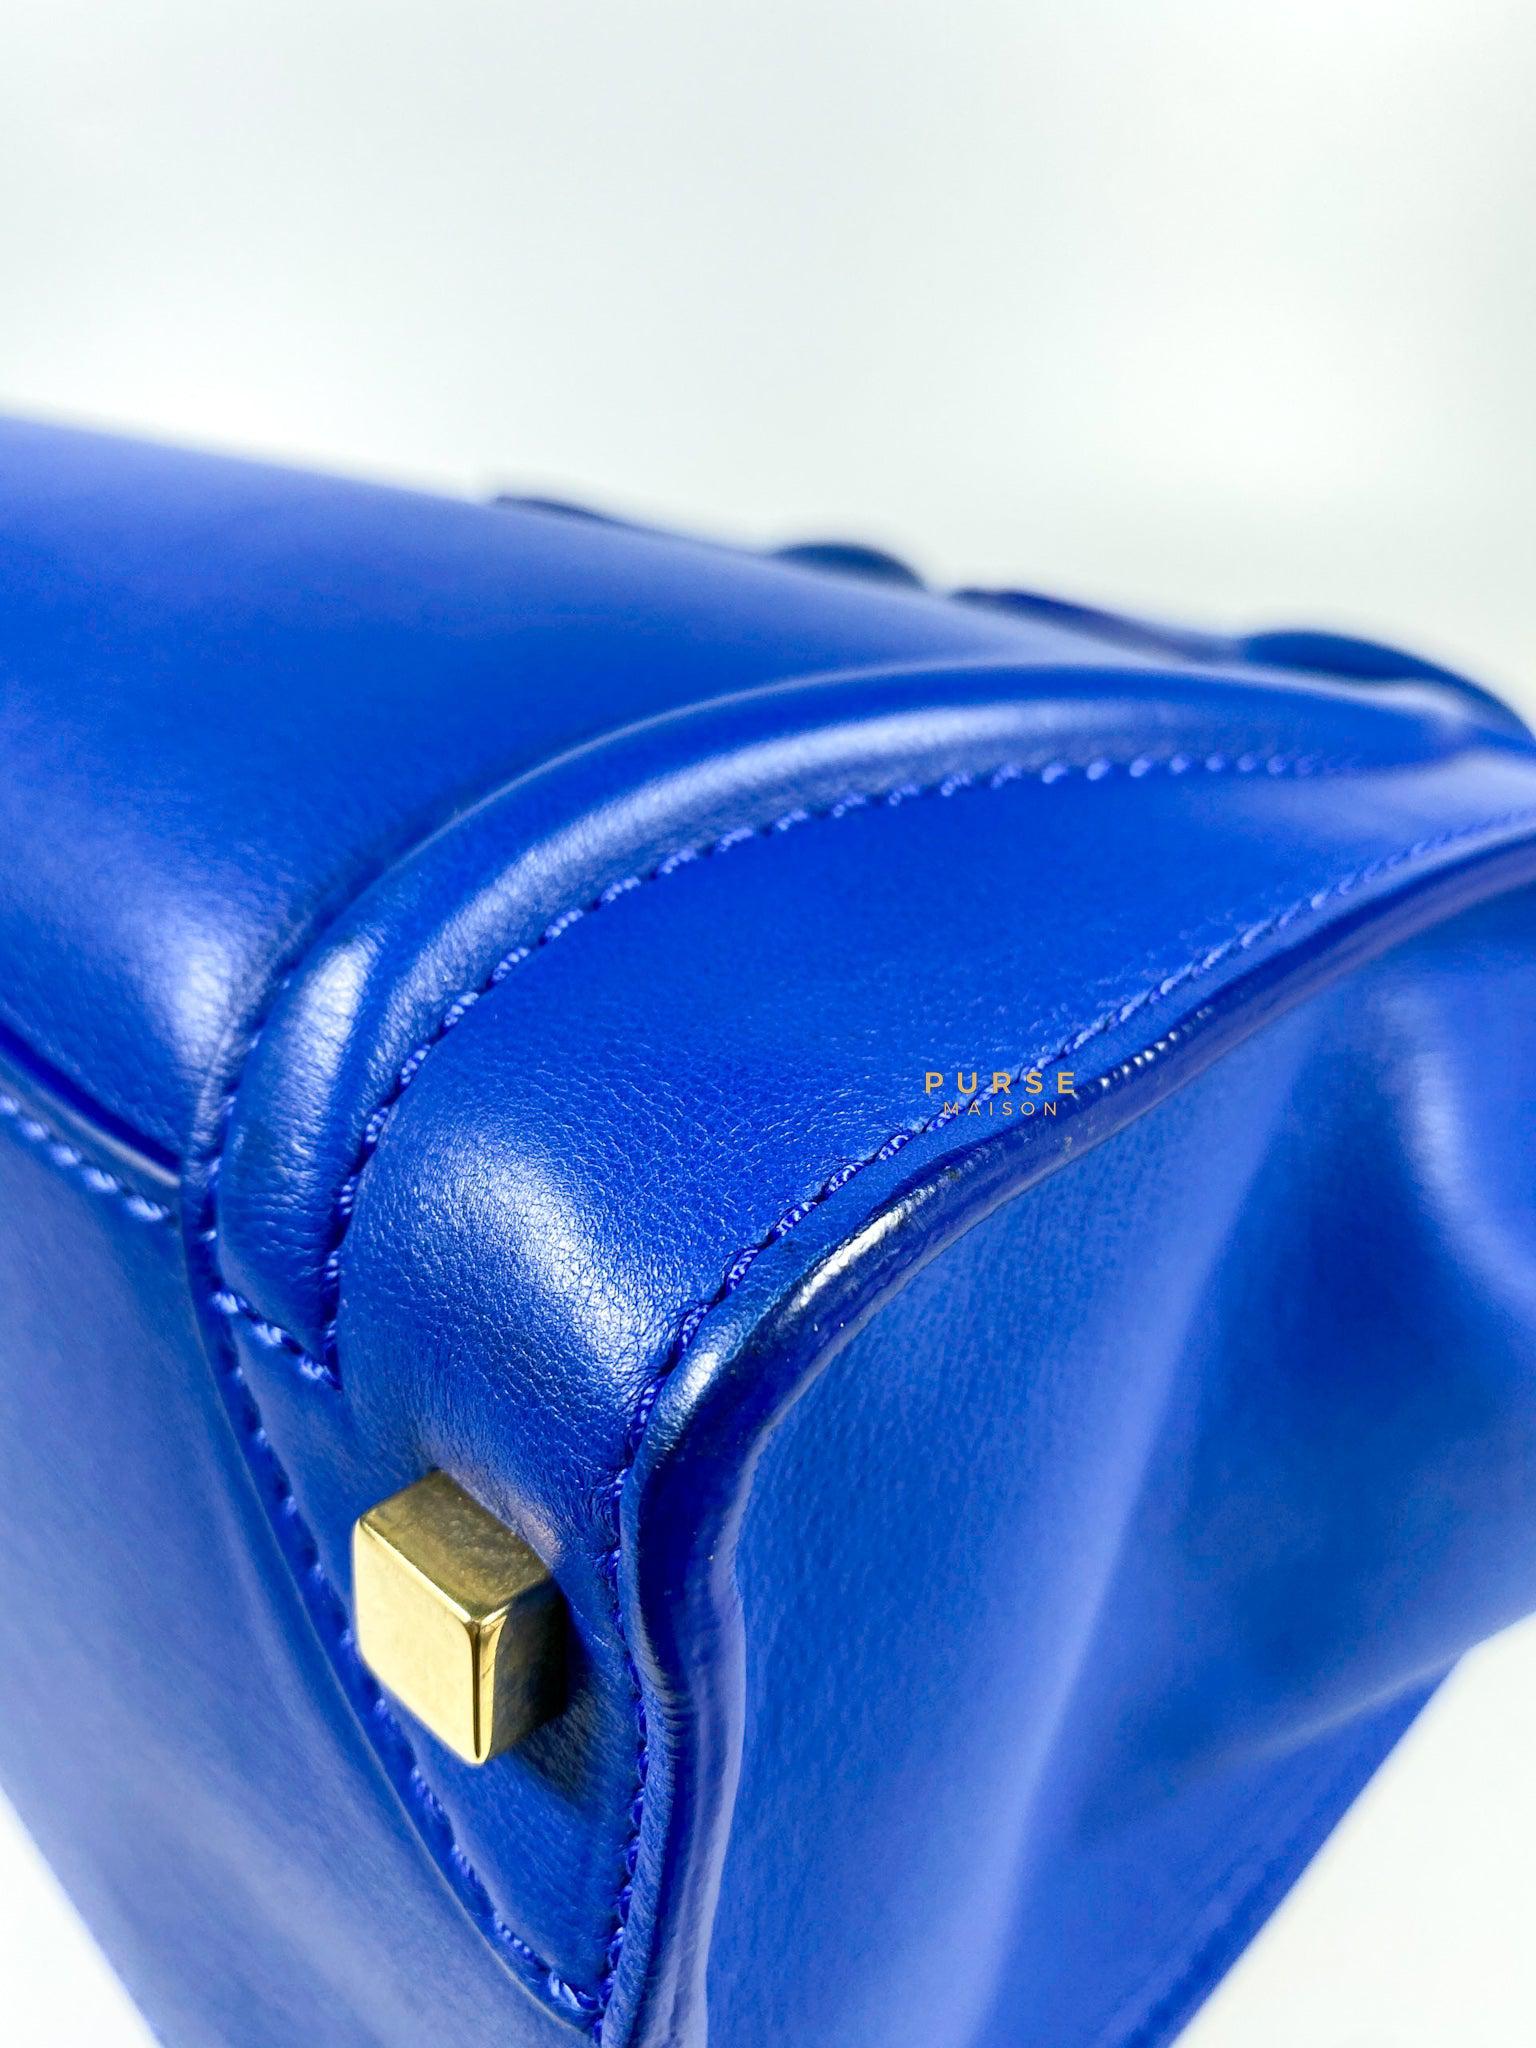 Buy Royal Blue Suede Leather Clutch Purse, Blue Leather Bag, Leather  Envelope Clutch, Blue Clutch Bag, Blue Leather Handbag, Leather Evening Bag  Online in India - Etsy